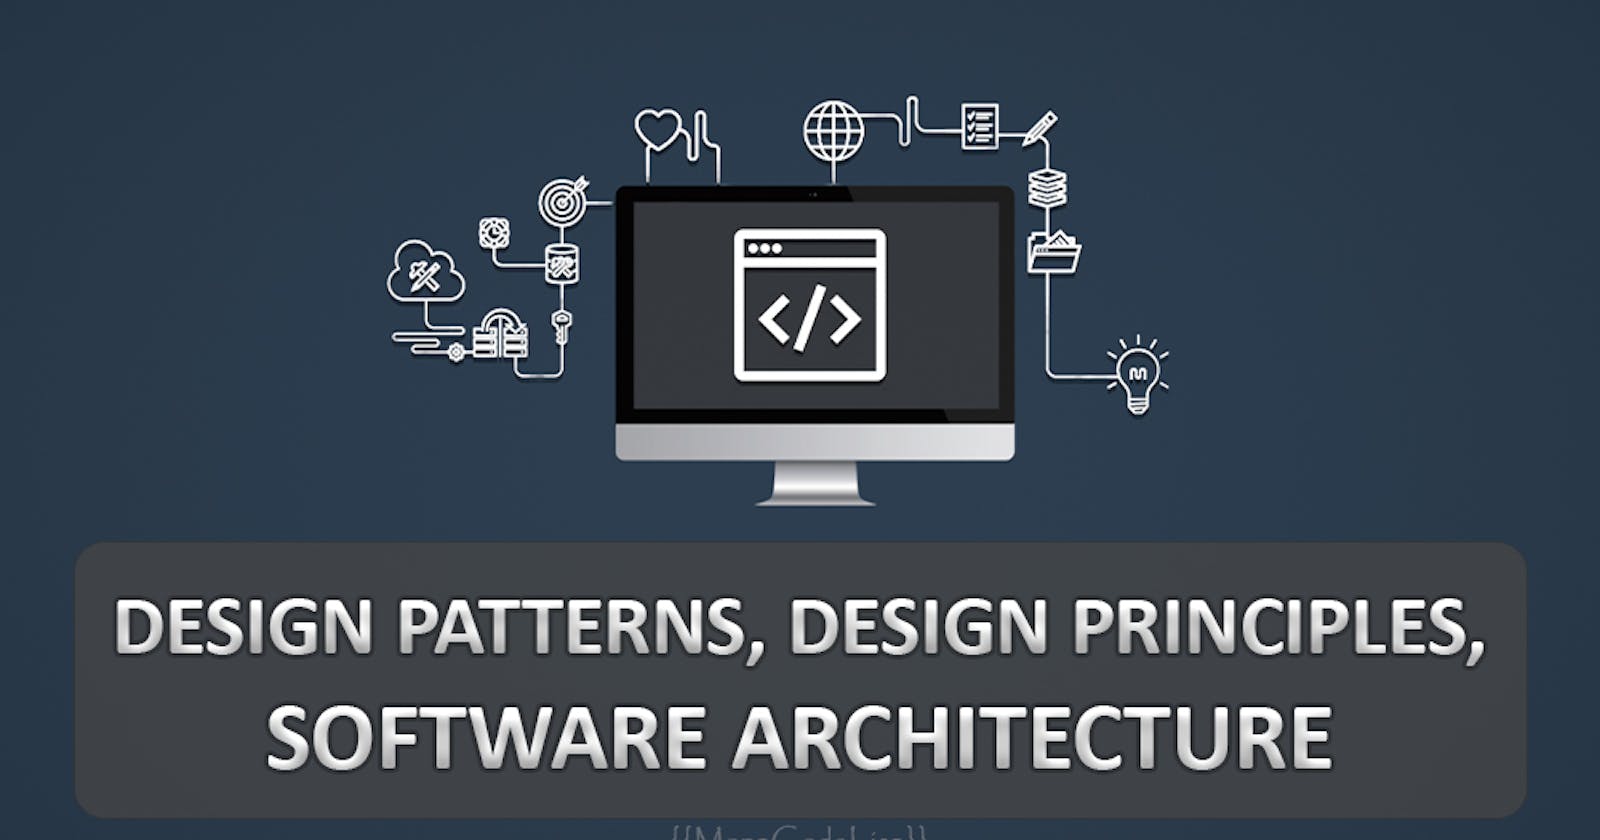 Design Patterns, Design Principles and App Architecture - what is the difference?